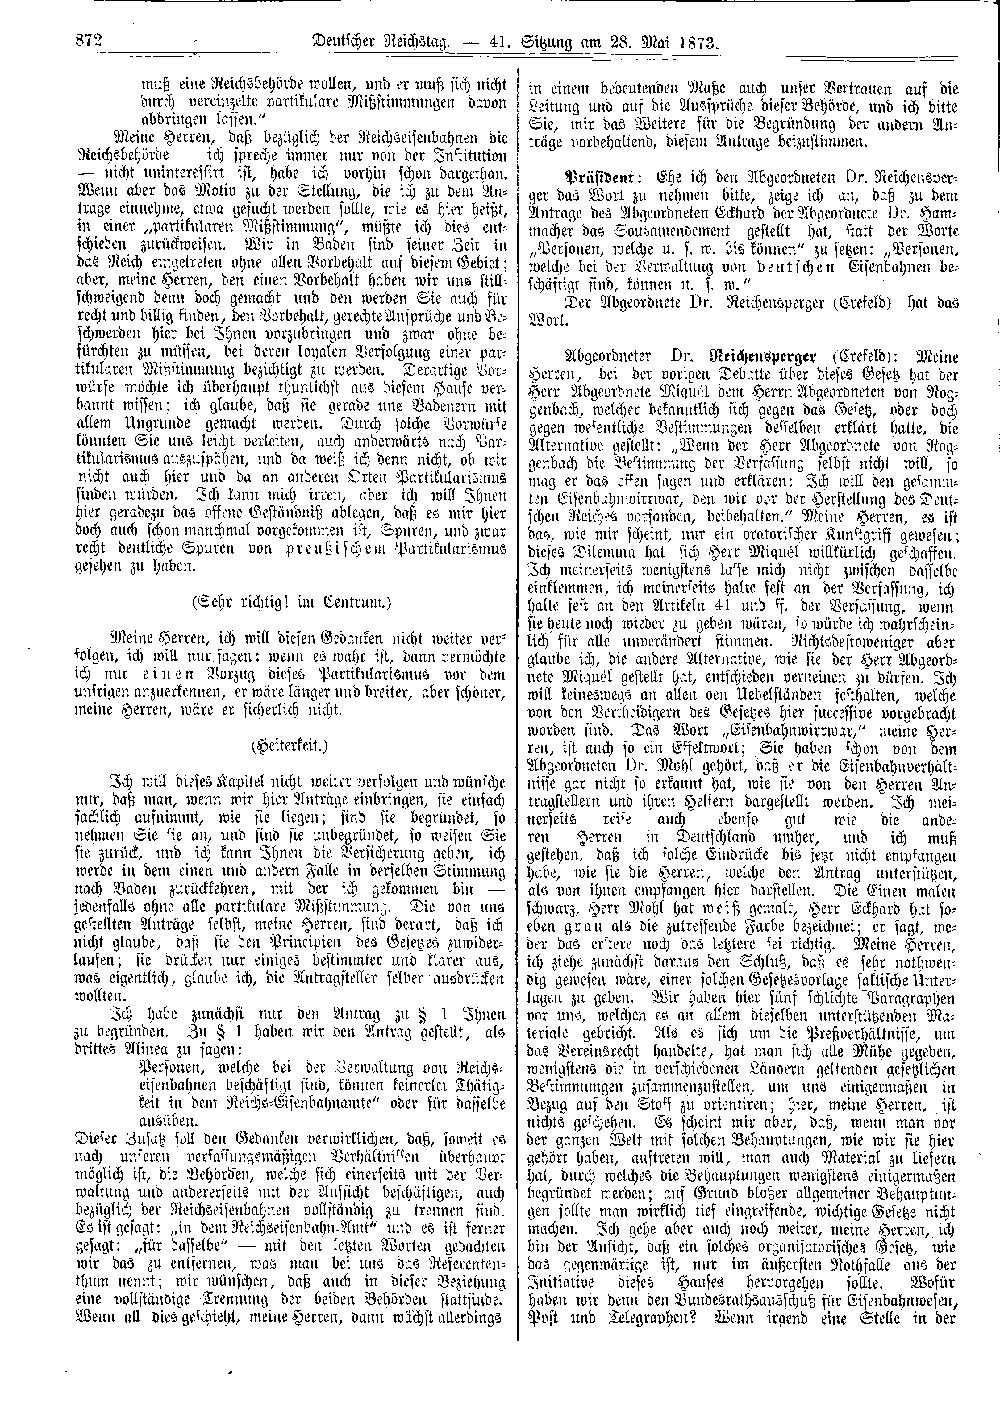 Scan of page 872